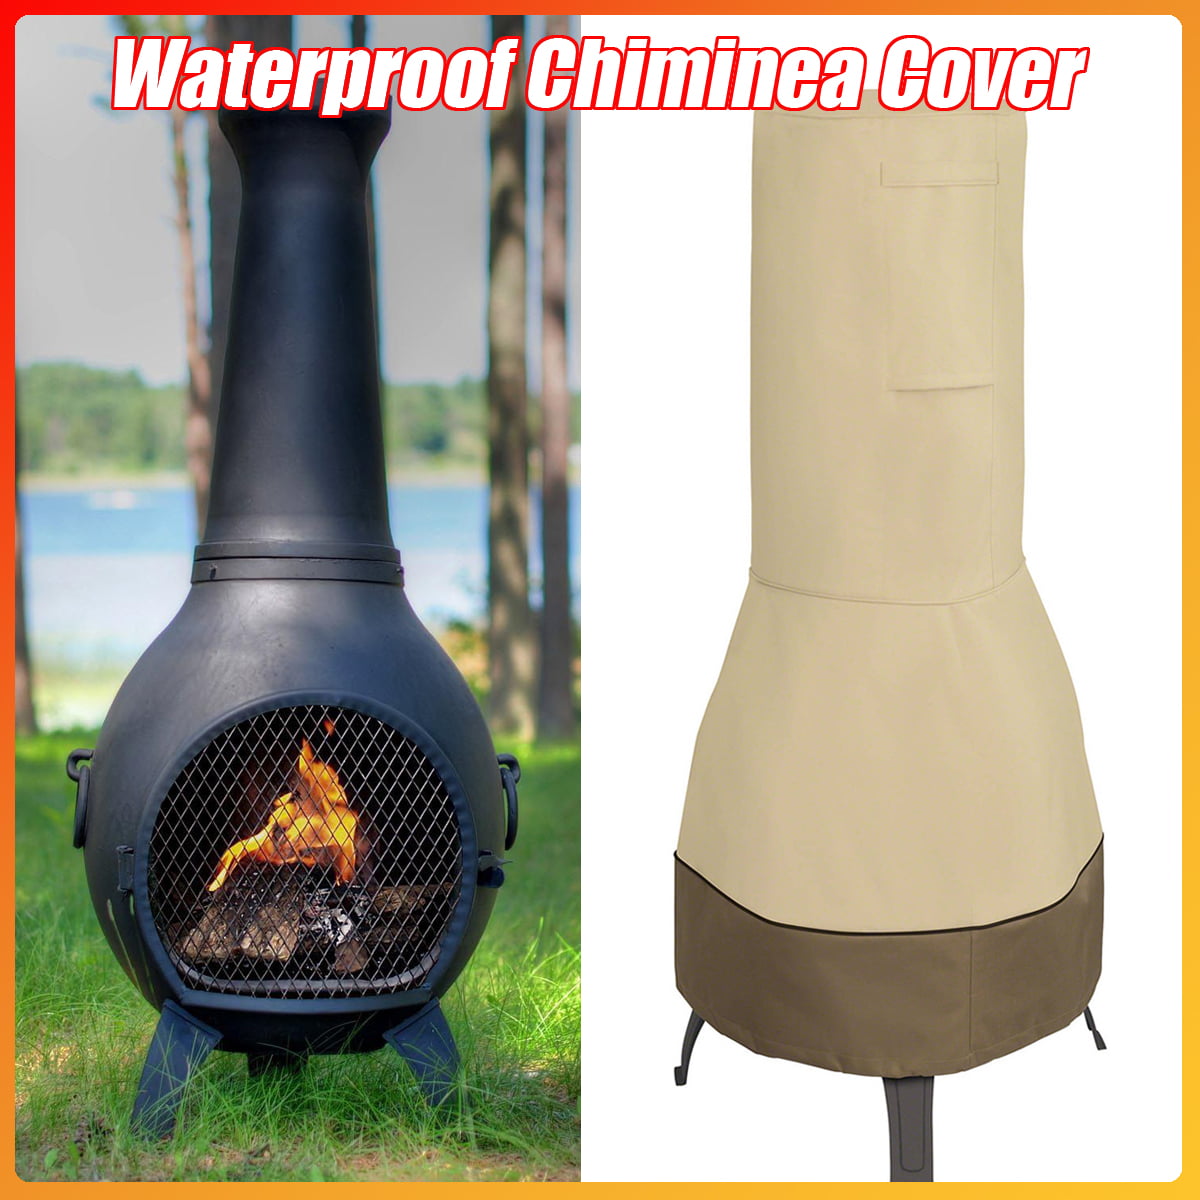 harupink Patio Heater Covers Outdoor Chimenea Cover Heavy Duty Waterproof Rain Sun Uv Protector for Garden Chimney Fire Pit Fountain Year Around Protective Black